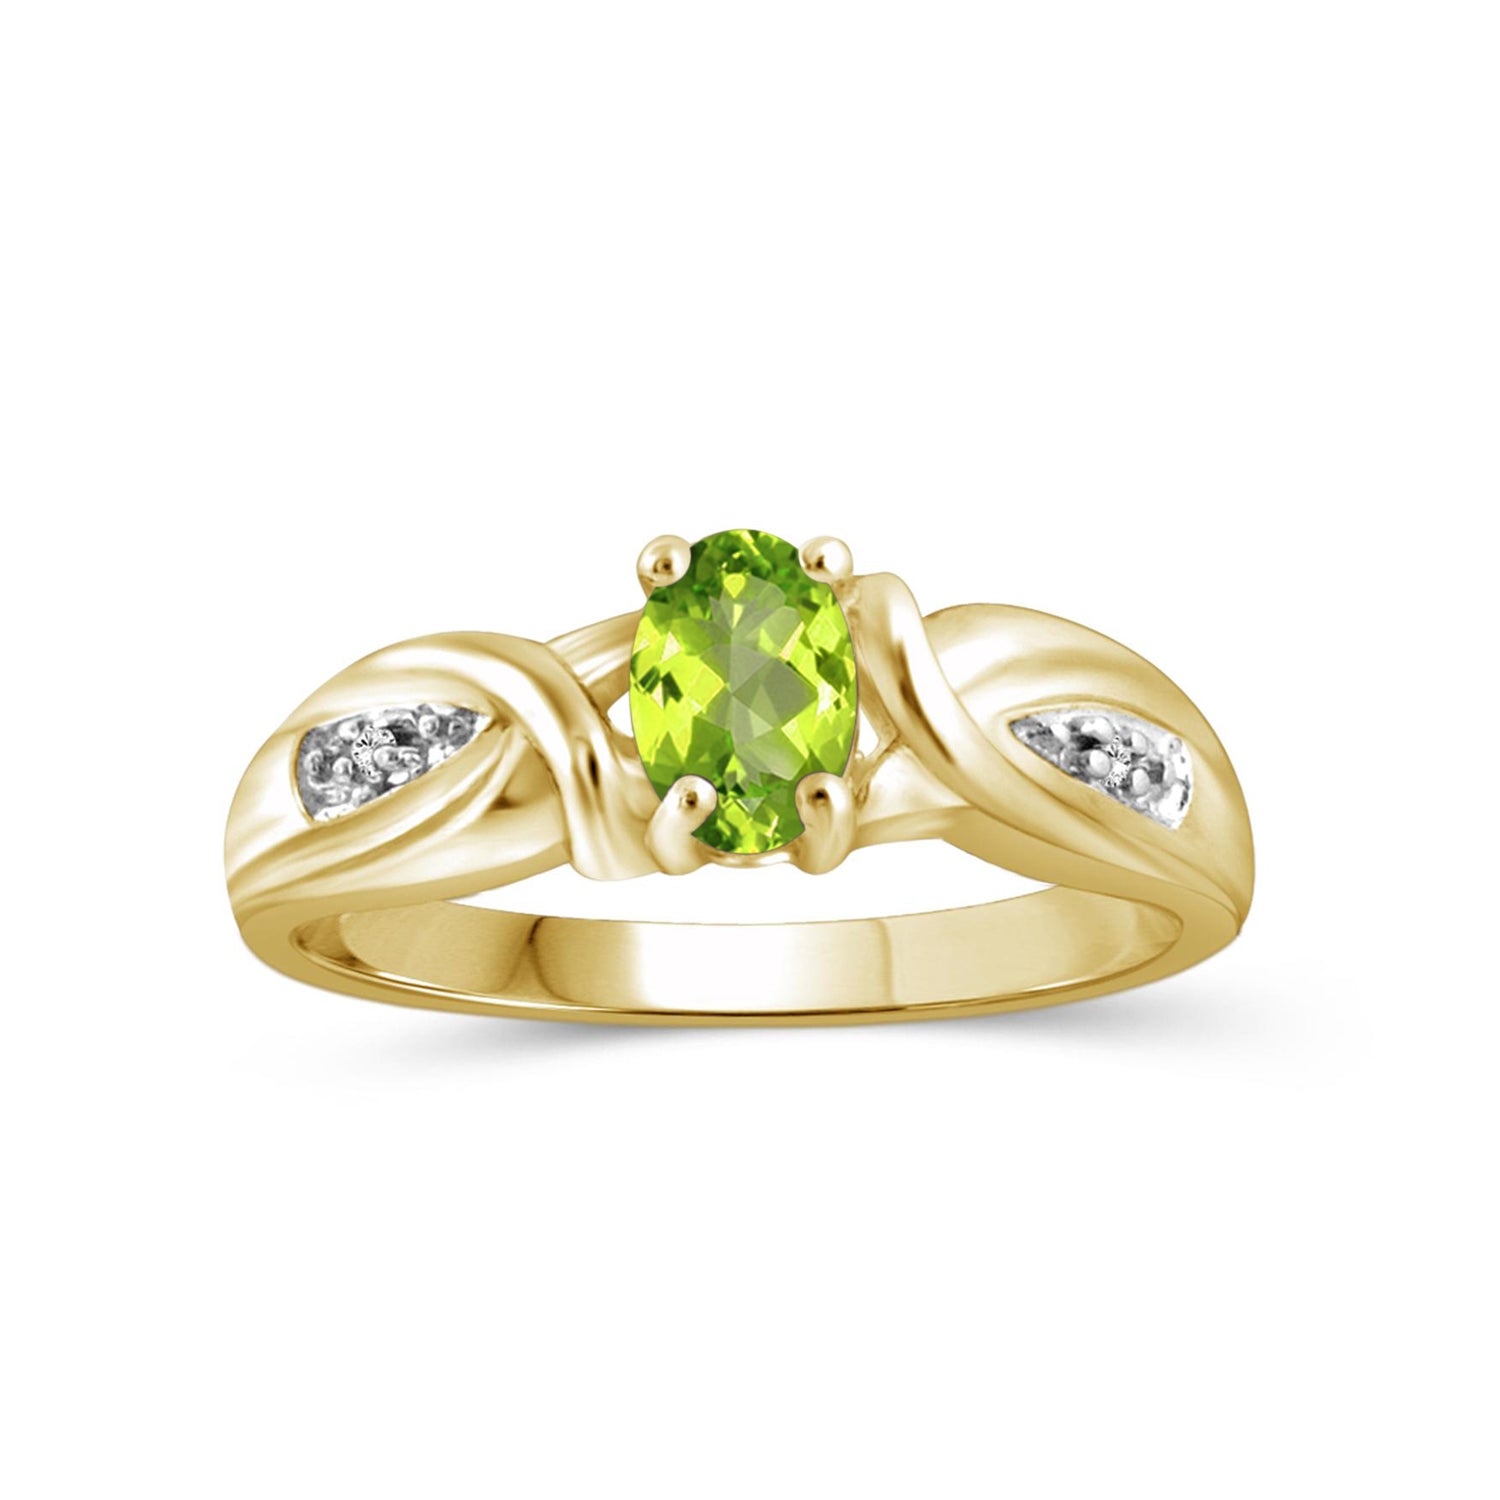 0.48 Carat T.G.W. Peridot Gemstone and White Diamond Accent 14K Gold-plated Ring